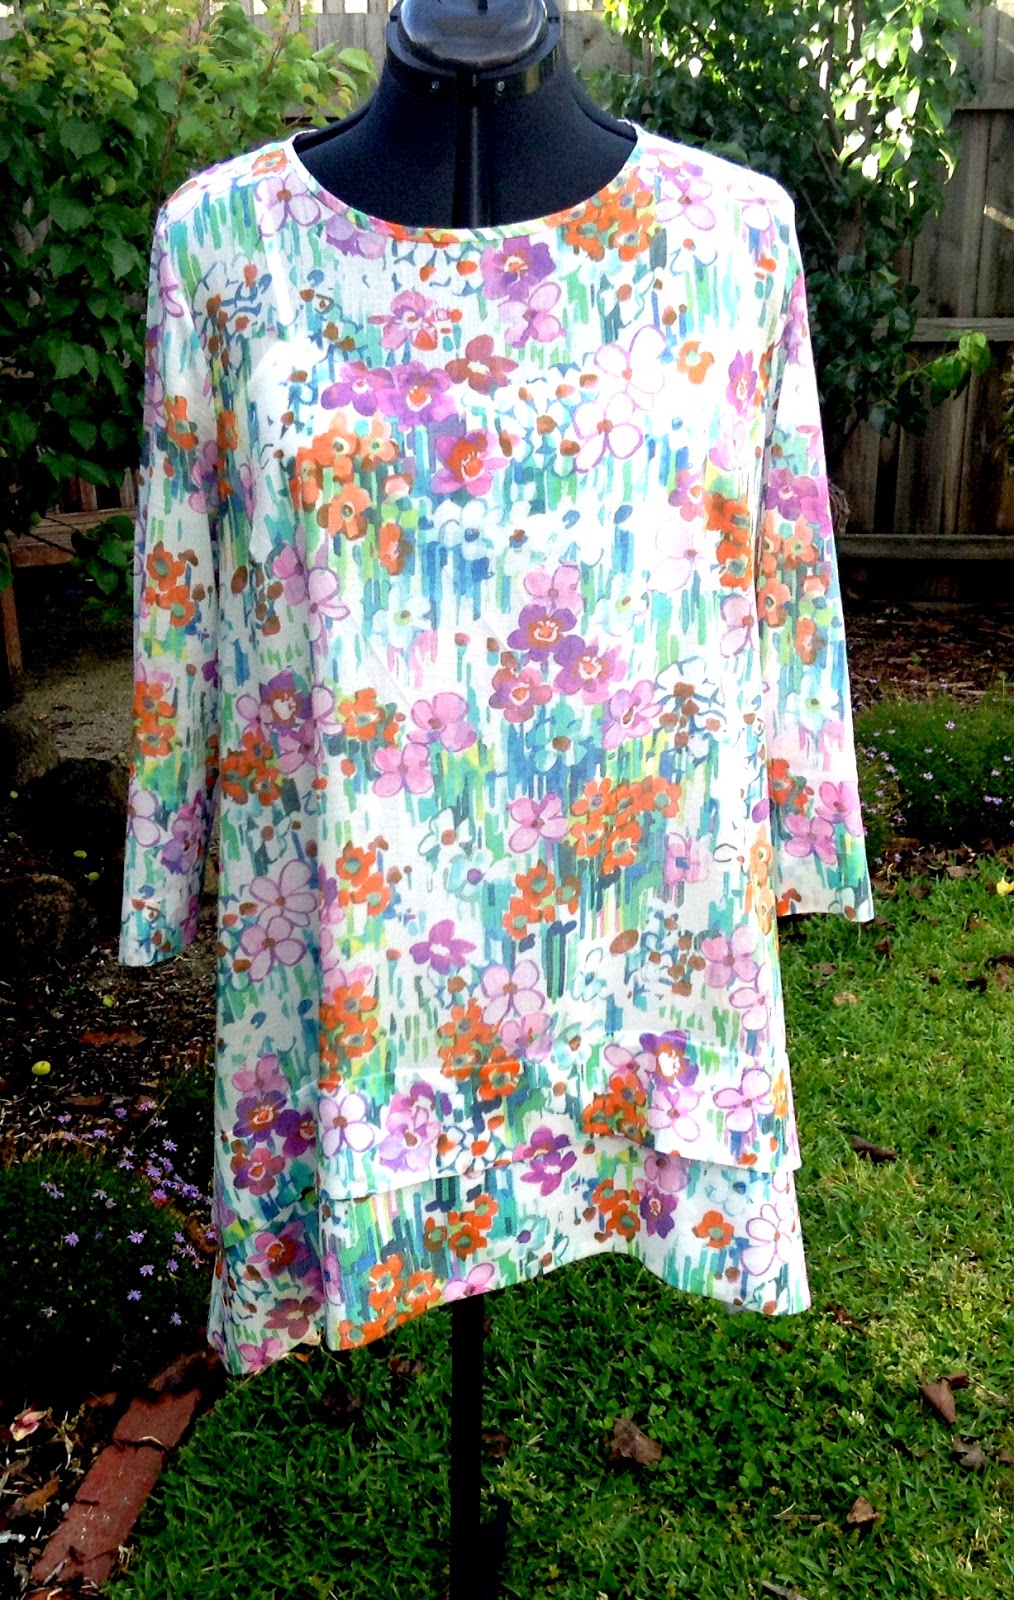 sew and read: The Daisy Designer Tunic by Stylearc